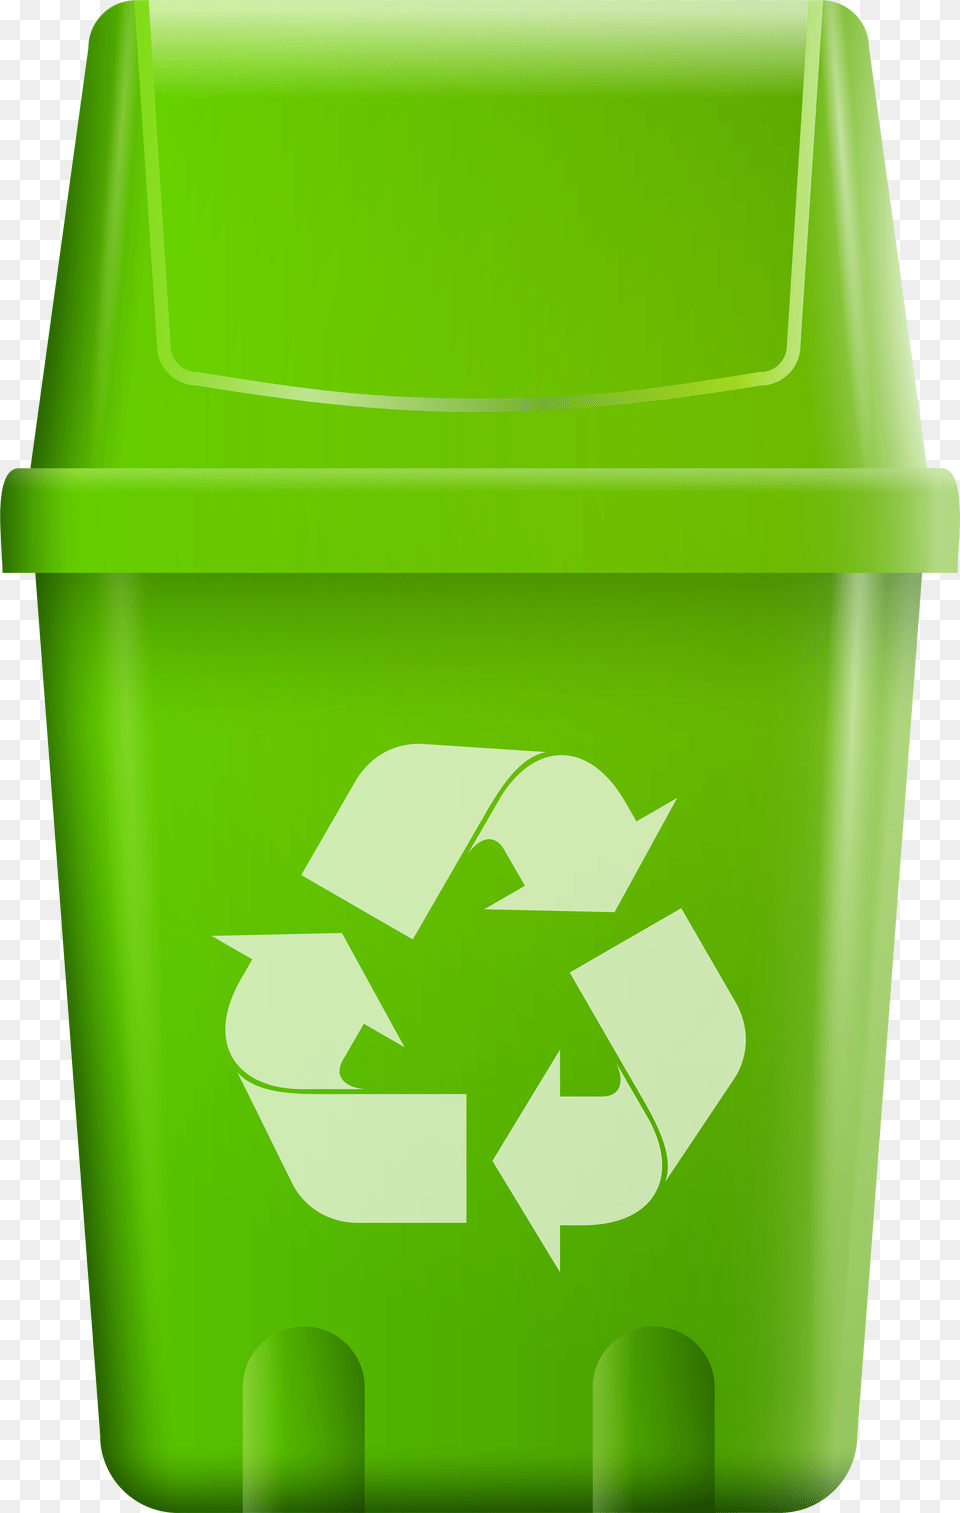 Trash Bin With Recycle Symbol Clip Art Recycle Round Icon, Recycling Symbol, Bottle, Shaker Png